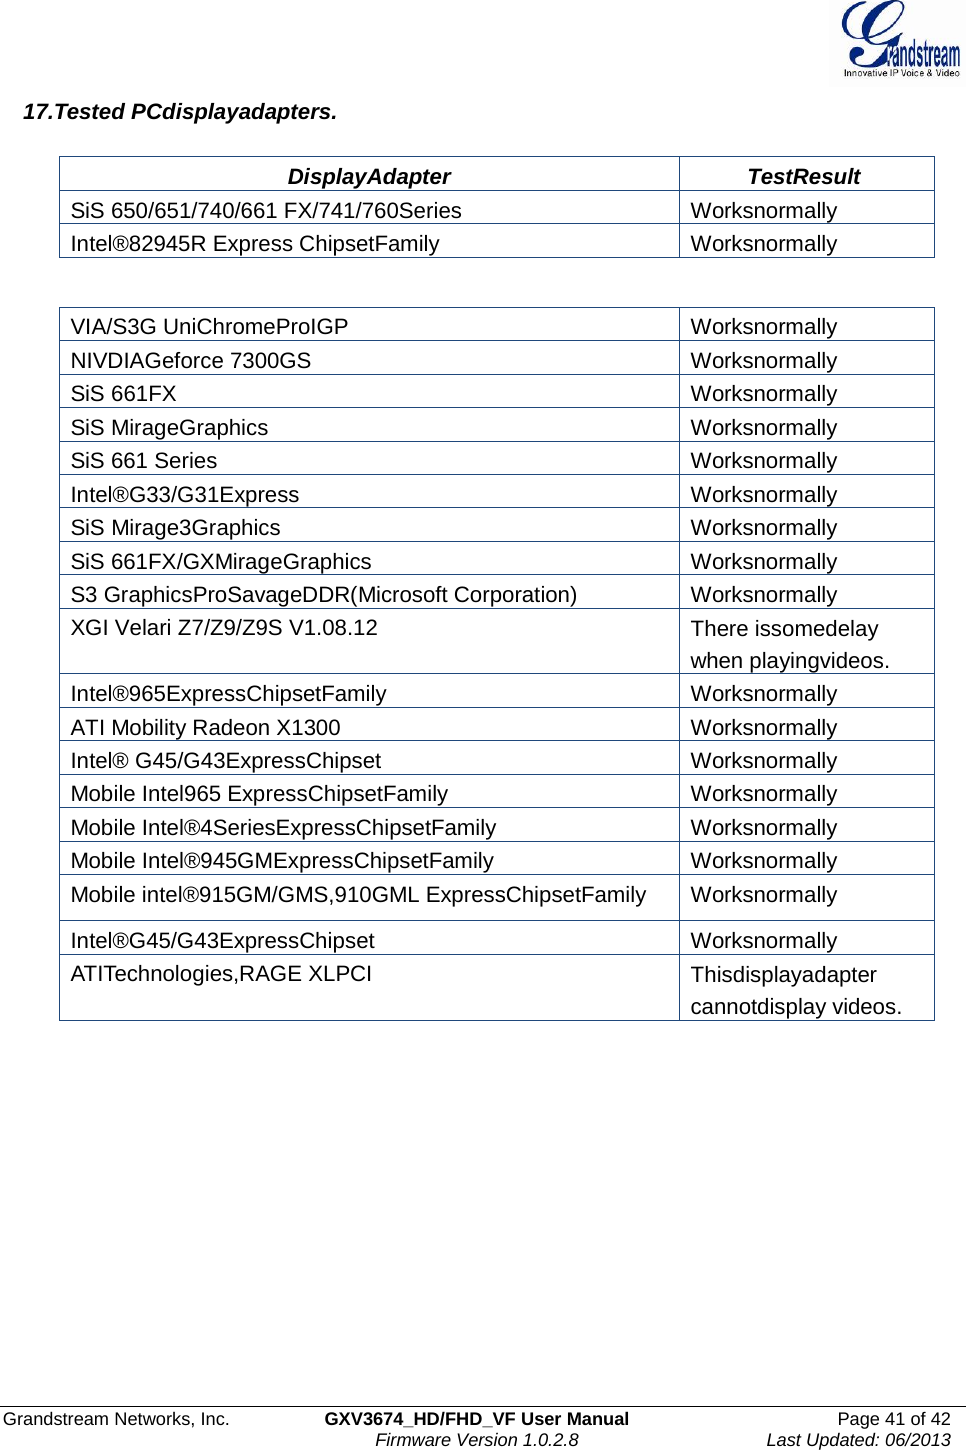  Grandstream Networks, Inc.  GXV3674_HD/FHD_VF User Manual  Page 41 of 42   Firmware Version 1.0.2.8  Last Updated: 06/2013  17.Tested PCdisplayadapters.   DisplayAdapter TestResult SiS 650/651/740/661 FX/741/760Series Worksnormally Intel®82945R Express ChipsetFamily Worksnormally   VIA/S3G UniChromeProIGP Worksnormally NIVDIAGeforce 7300GS Worksnormally SiS 661FX Worksnormally SiS MirageGraphics Worksnormally SiS 661 Series Worksnormally Intel®G33/G31Express Worksnormally SiS Mirage3Graphics Worksnormally SiS 661FX/GXMirageGraphics Worksnormally S3 GraphicsProSavageDDR(Microsoft Corporation) Worksnormally XGI Velari Z7/Z9/Z9S V1.08.12 There issomedelay when playingvideos.Intel®965ExpressChipsetFamily Worksnormally ATI Mobility Radeon X1300 Worksnormally Intel® G45/G43ExpressChipset Worksnormally Mobile Intel965 ExpressChipsetFamily Worksnormally Mobile Intel®4SeriesExpressChipsetFamily Worksnormally Mobile Intel®945GMExpressChipsetFamily Worksnormally Mobile intel®915GM/GMS,910GML ExpressChipsetFamily Worksnormally Intel®G45/G43ExpressChipset Worksnormally ATITechnologies,RAGE XLPCI Thisdisplayadapter cannotdisplay videos.            